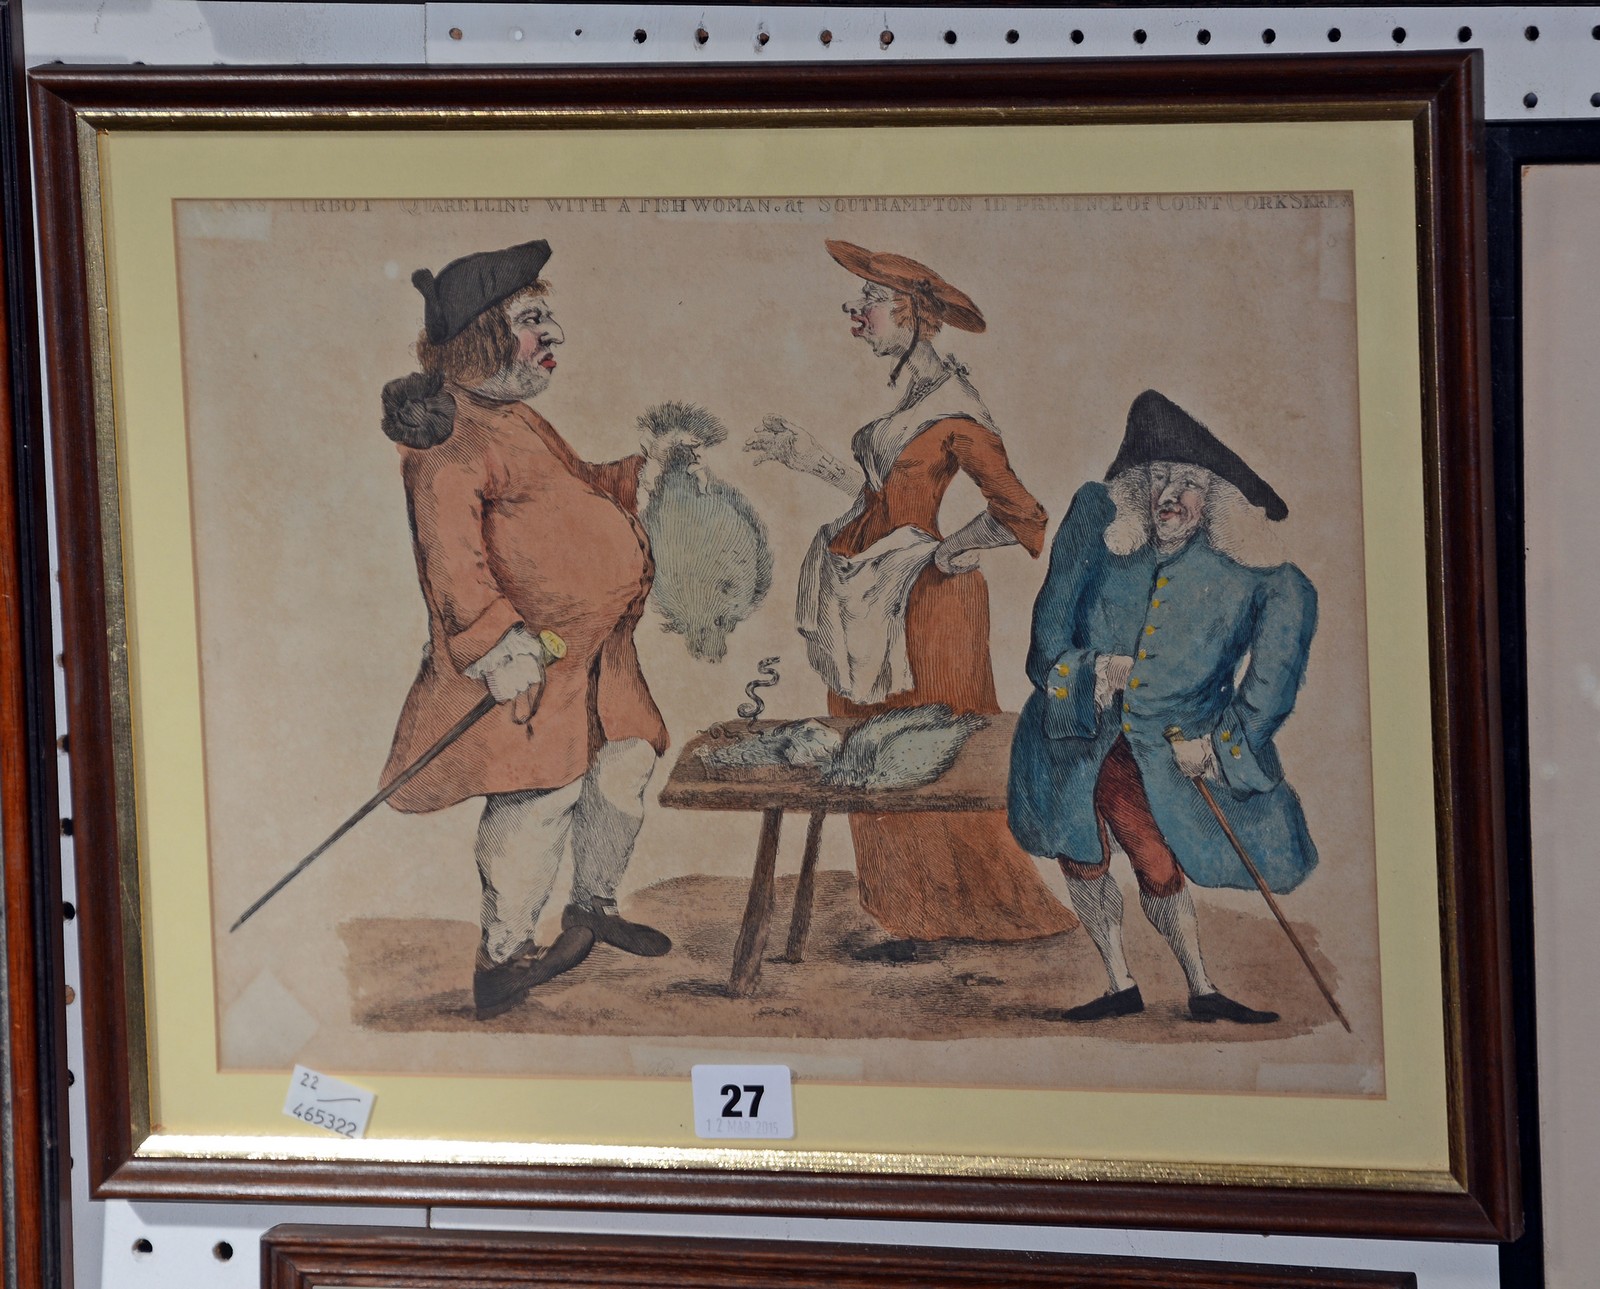 After Rowlandson (1756-1827) 'Hans Turbot Quarrelling with a Fishwoman at Southampton' Hand coloured